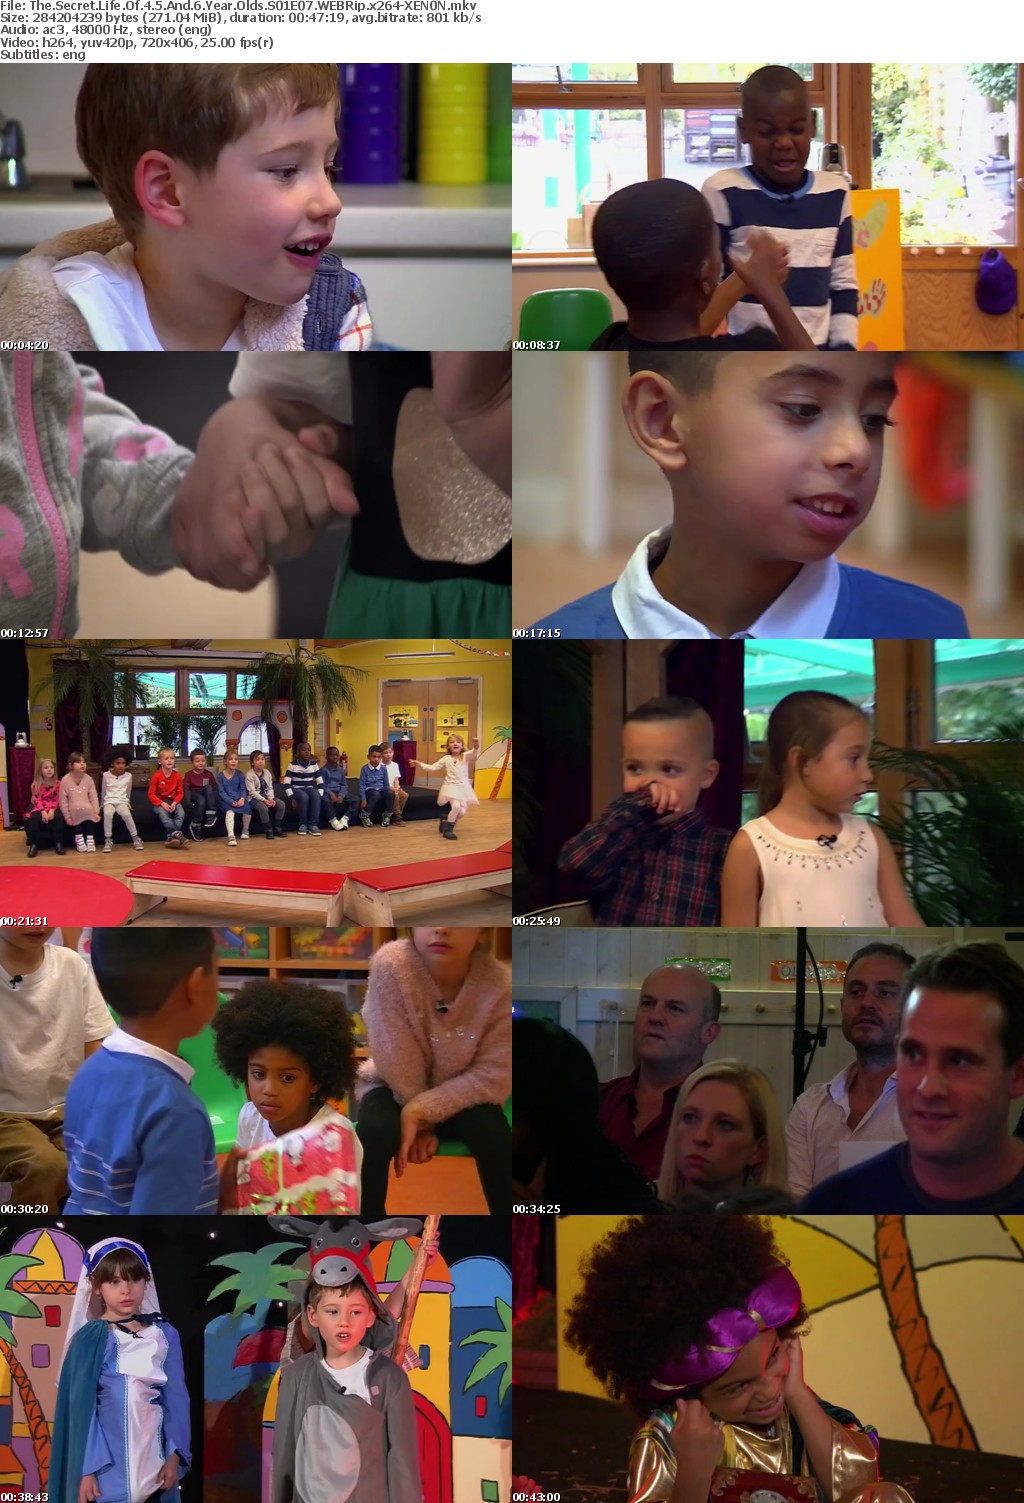 The Secret Life Of 4 5 And 6 Year Olds S01E07 WEBRip x264-XEN0N